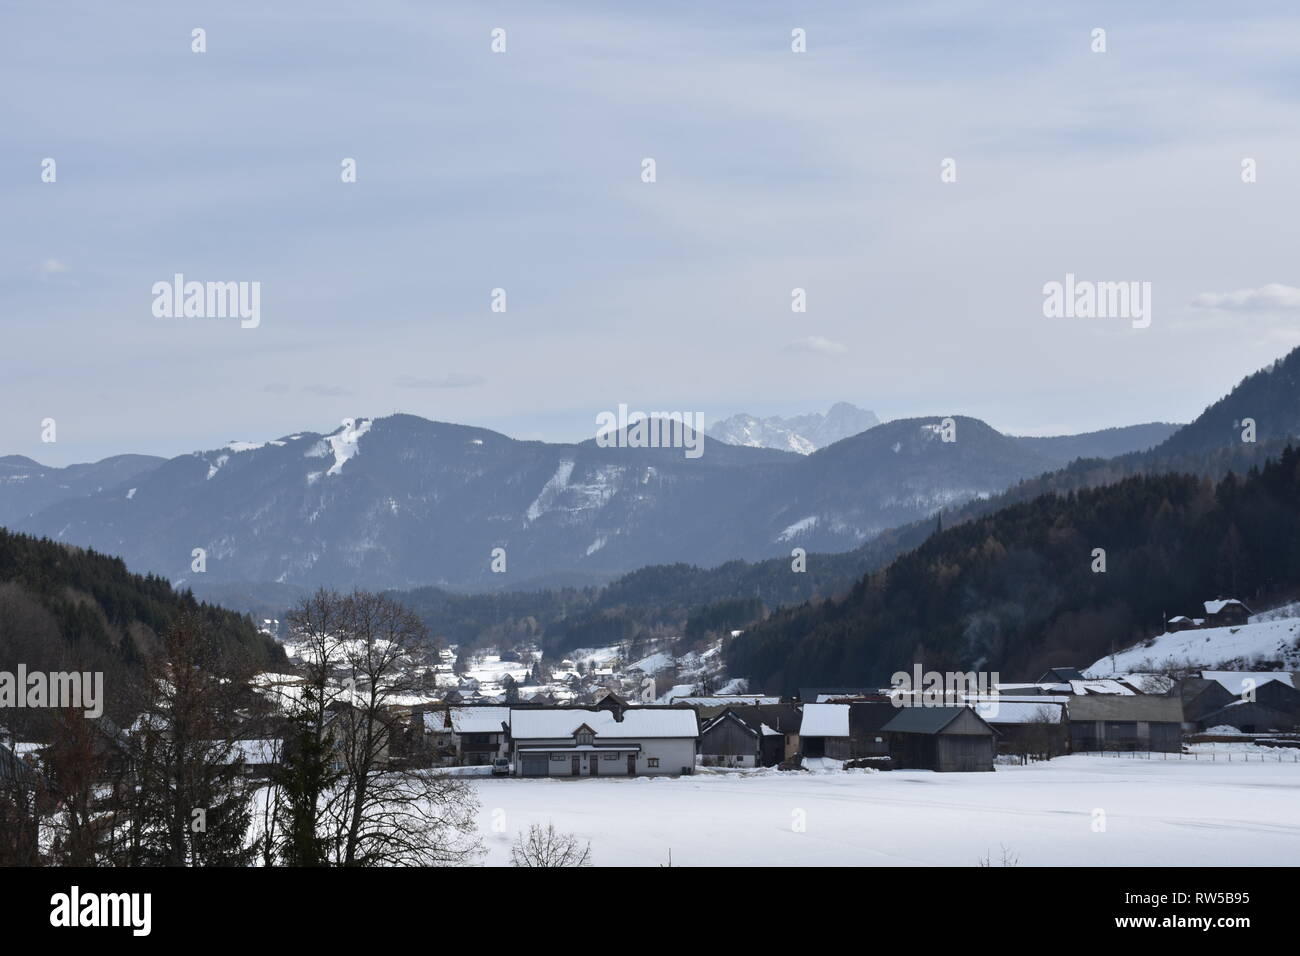 Dreilandereck High Resolution Stock Photography and Images - Alamy